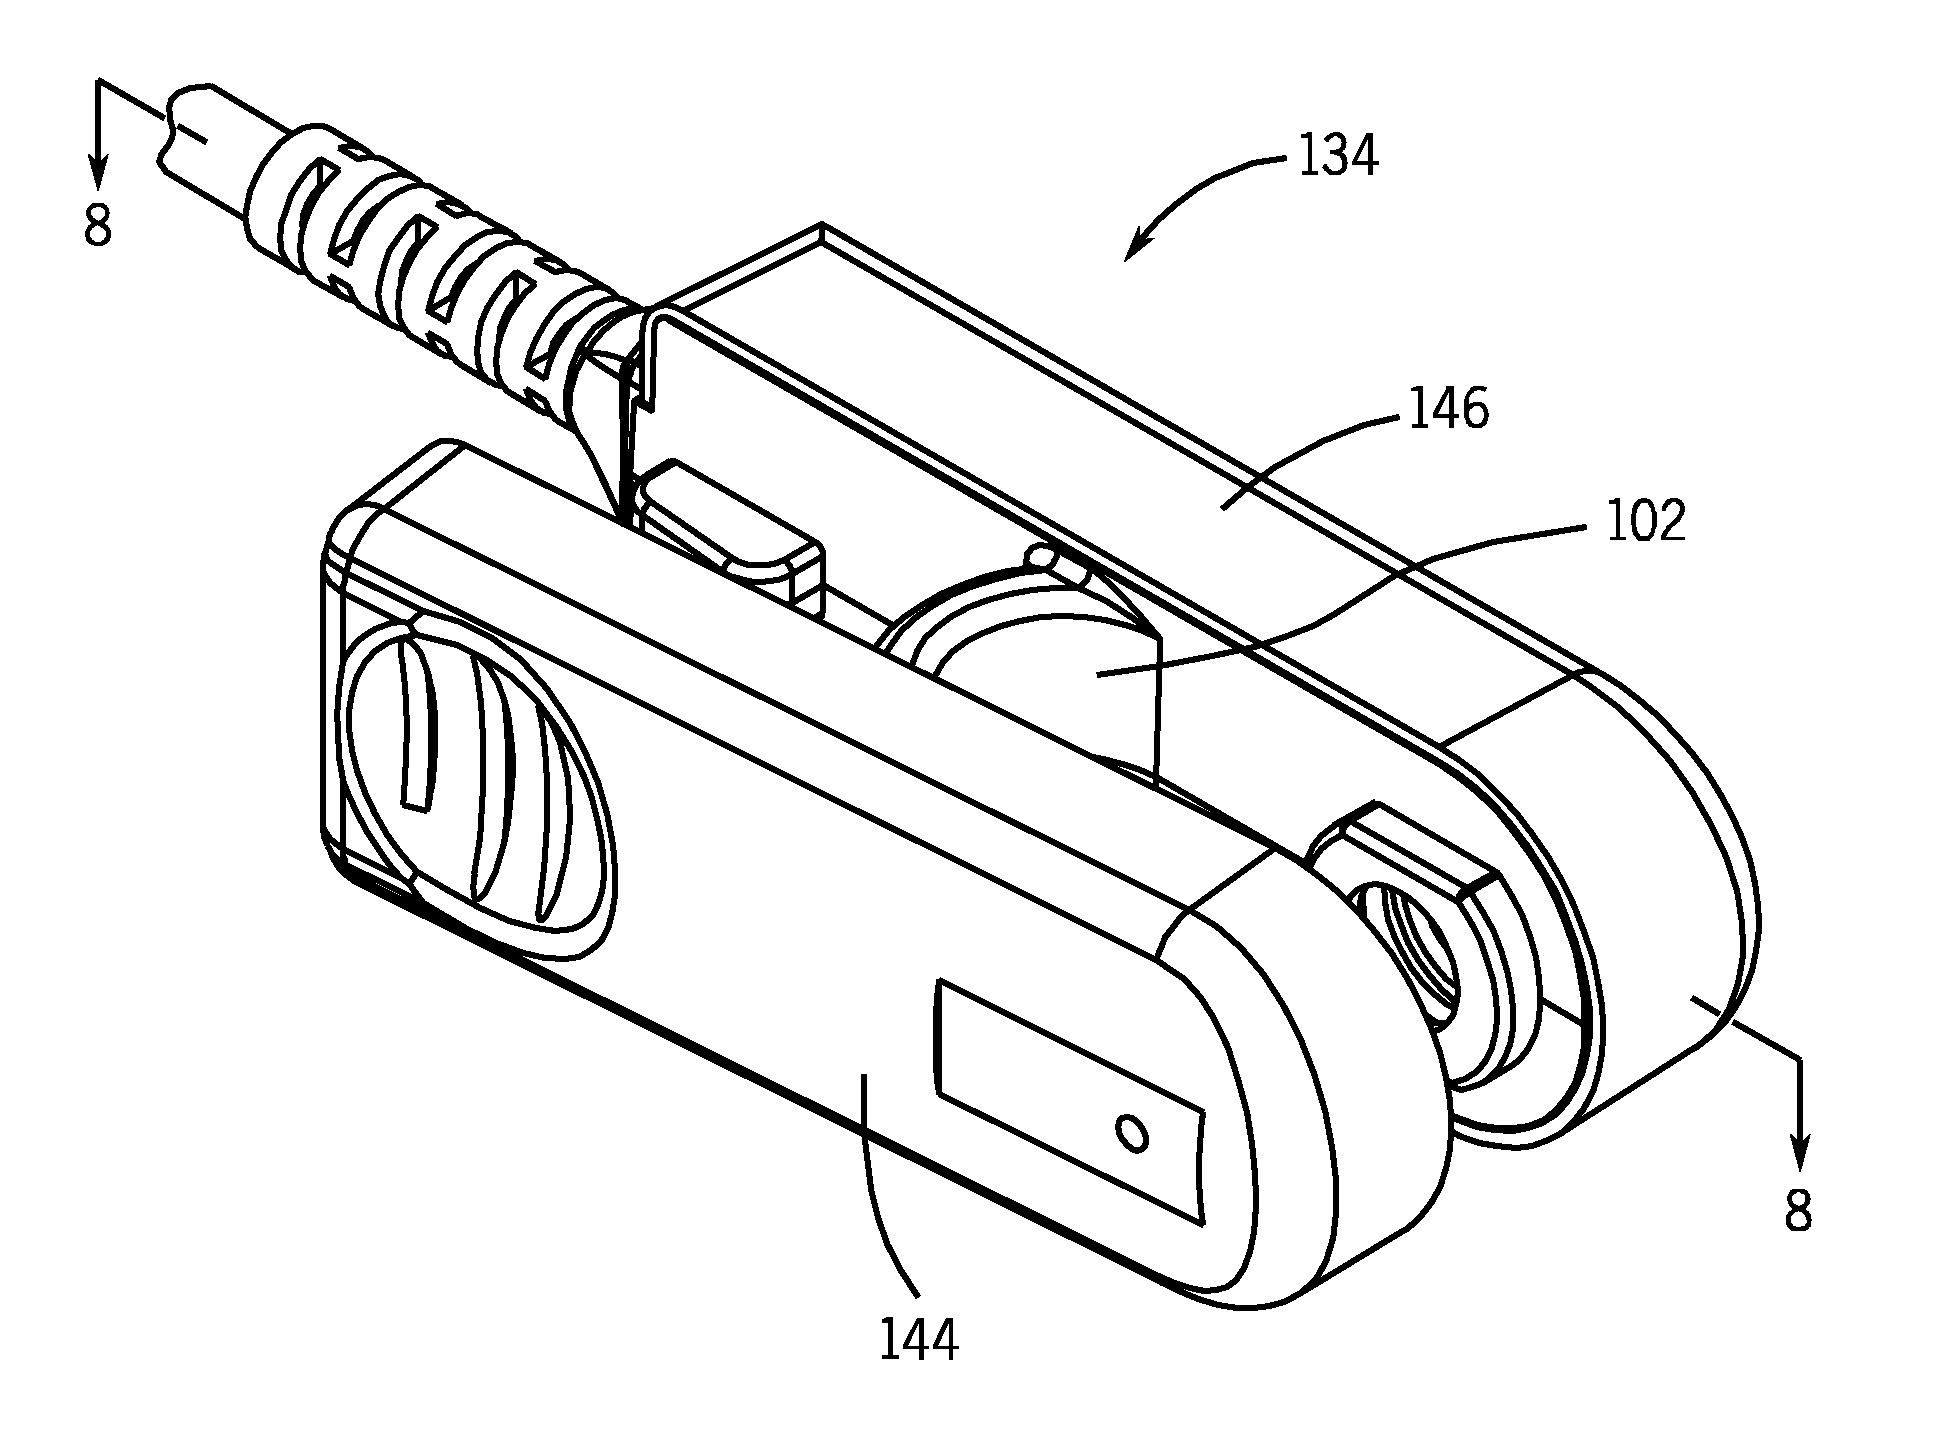 Sensor Clip Assembly for an Optical Monitoring System